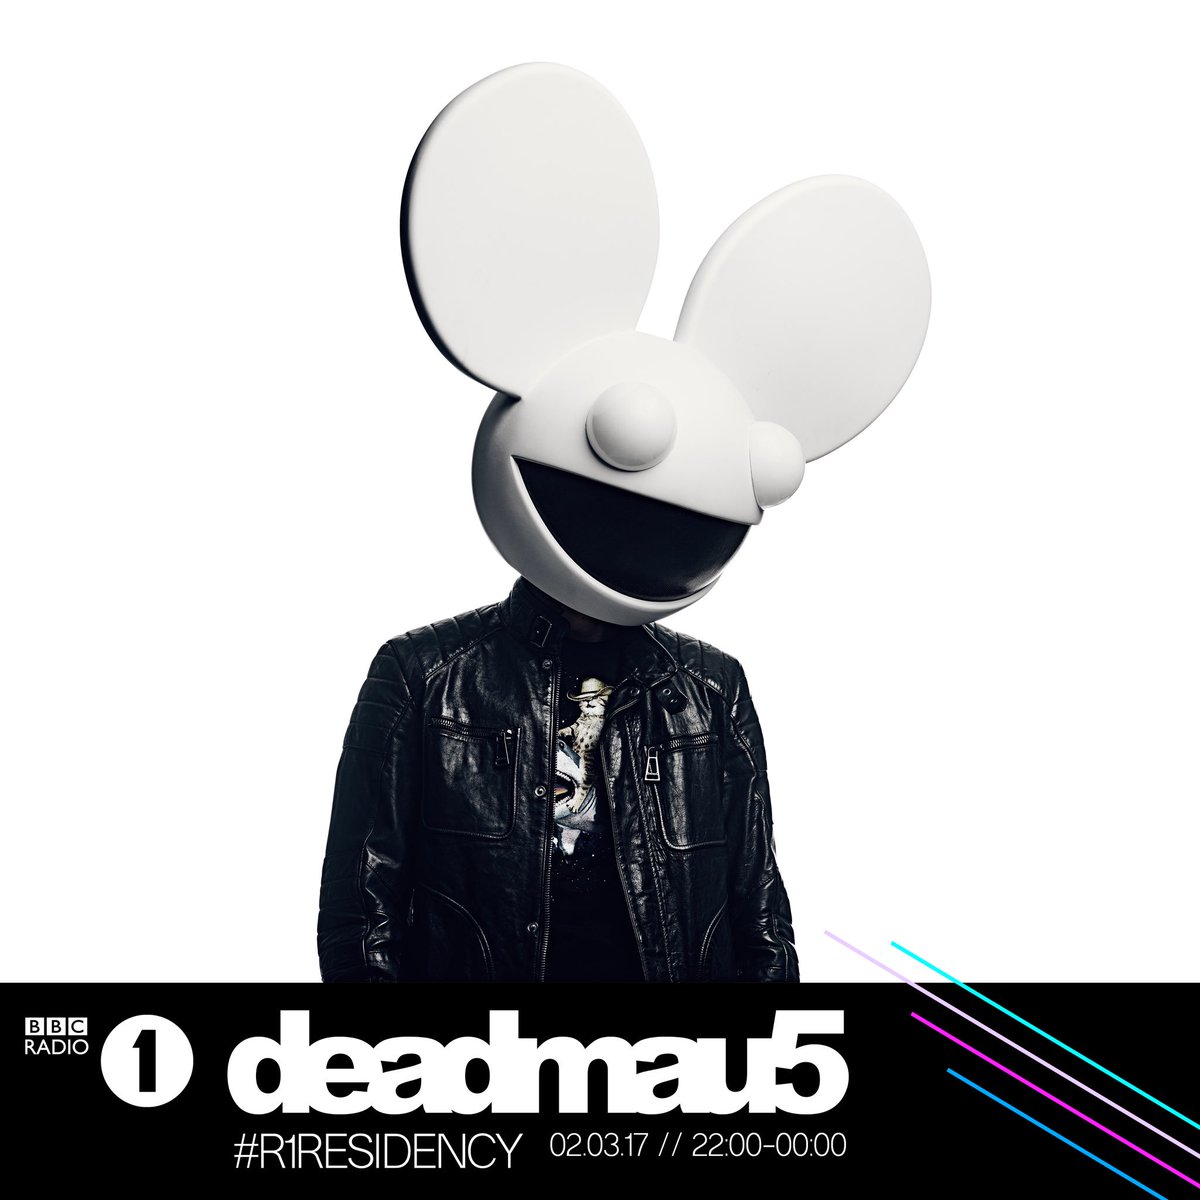 RT @mau5trap: .@deadmau5 is back on @BBCR1 tonight! tune in at https://t.co/chLIIbOGNq ???????? https://t.co/YqLc74S559